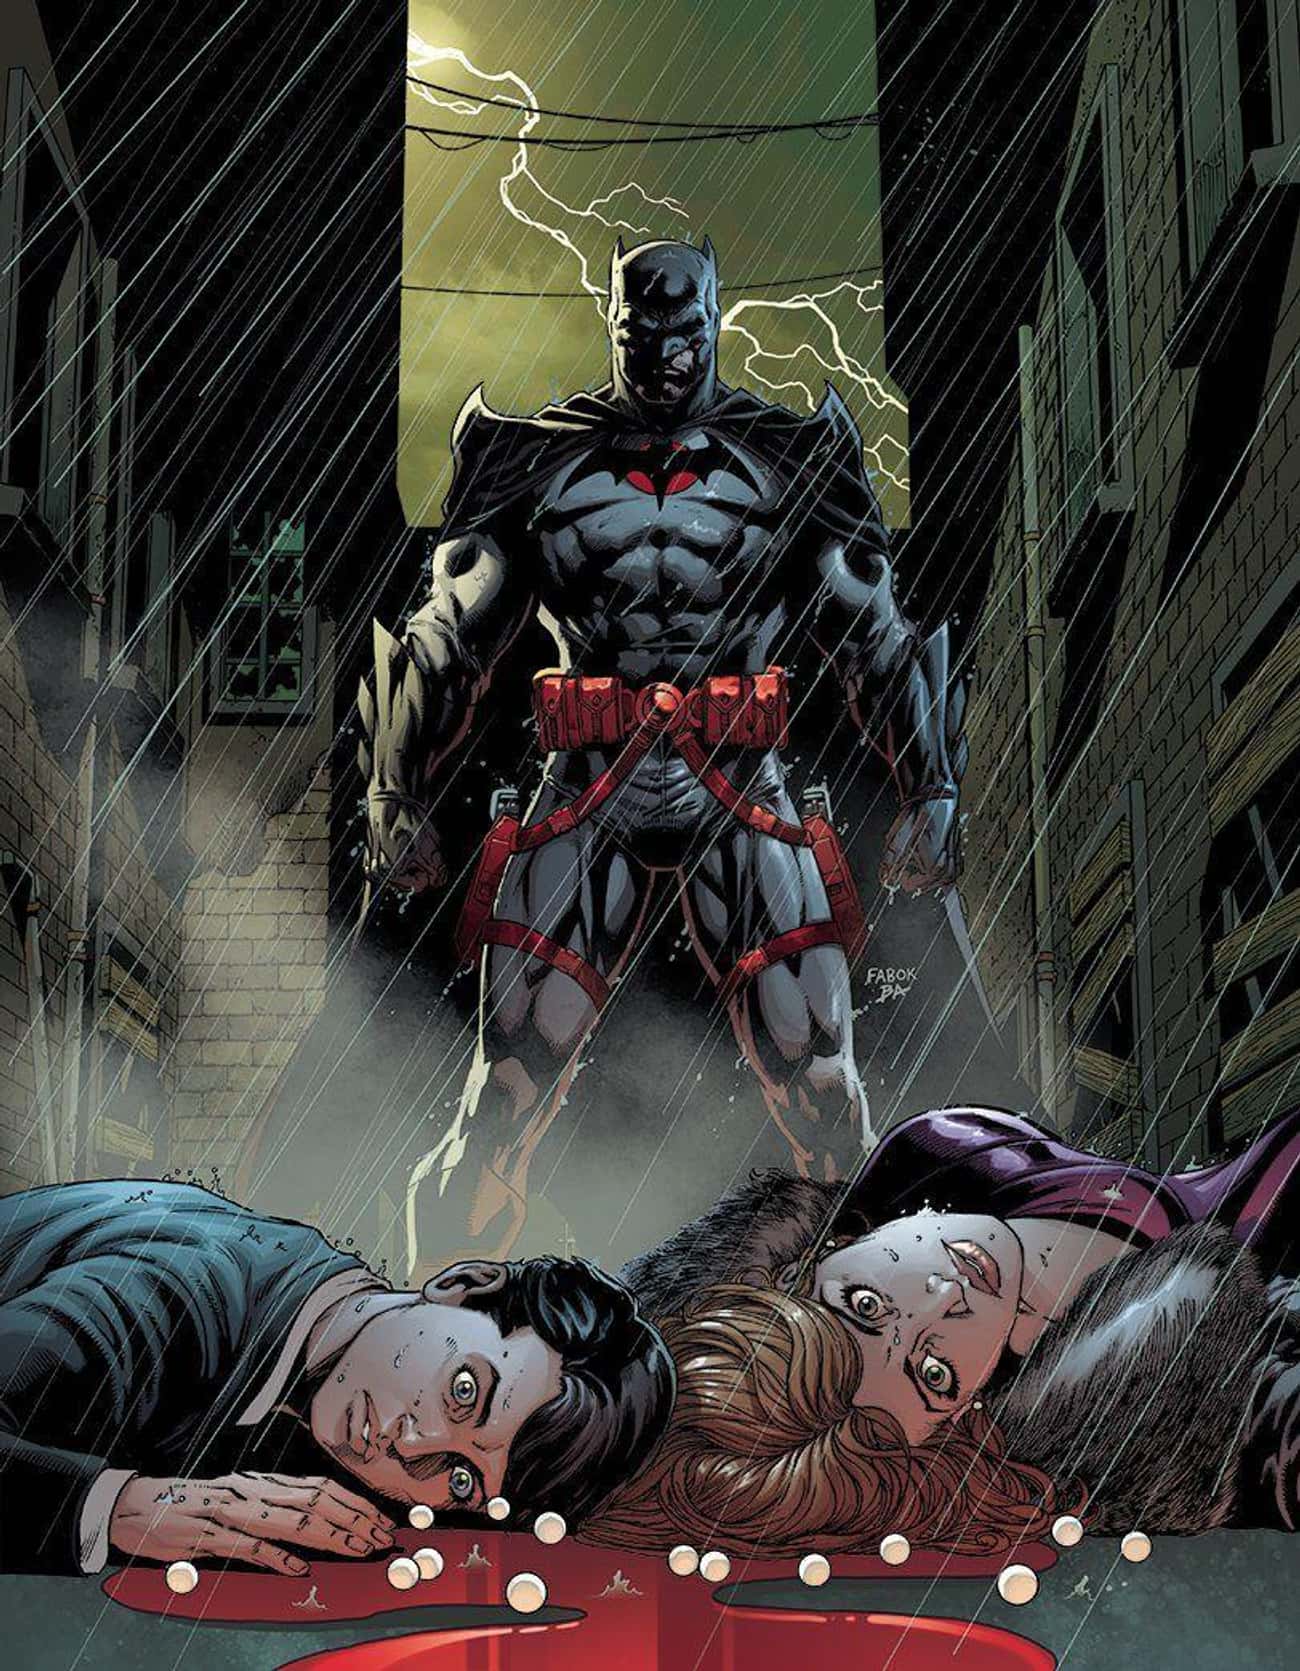 Bruce Wayne Was Slain In Crime Alley, Leaving His Father To Become A More Vicious Batman